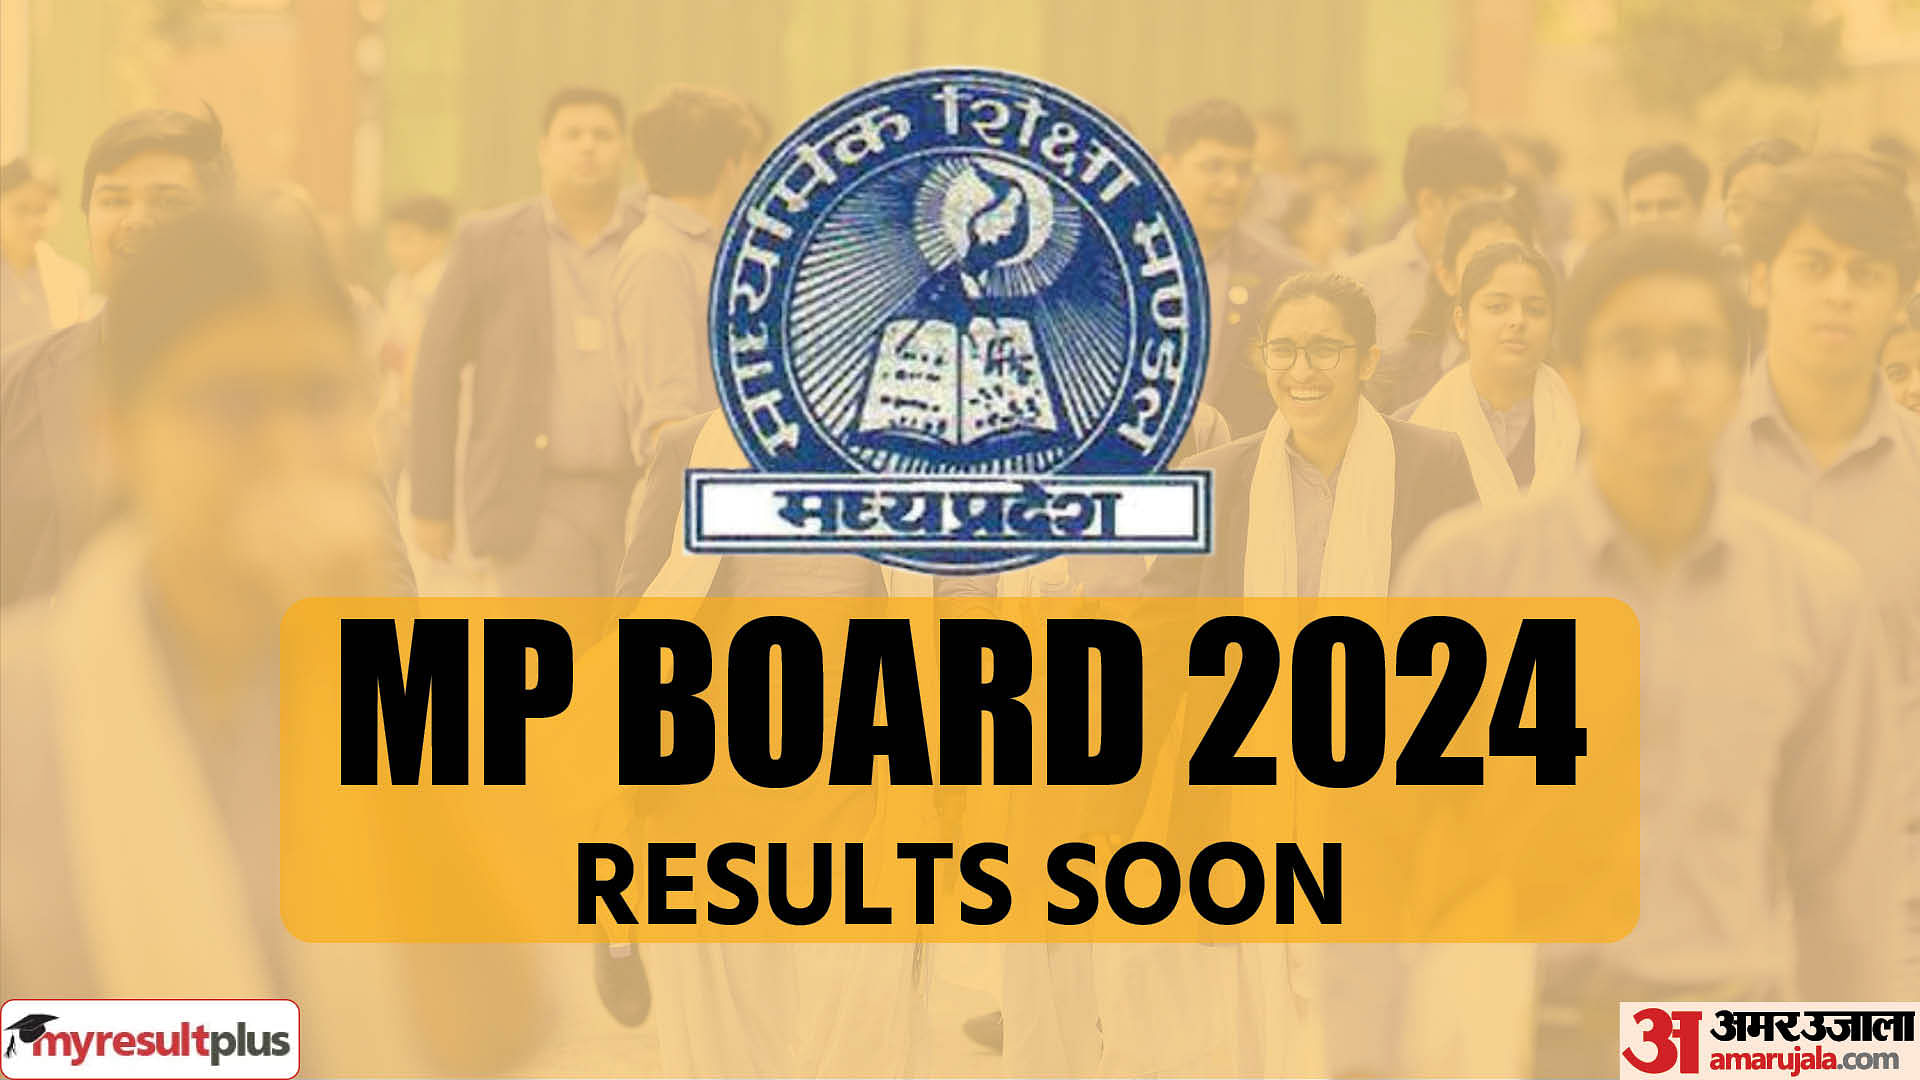 MP Board Result 2024 class 10, 12 will be released within a week's time, Check date and other details here